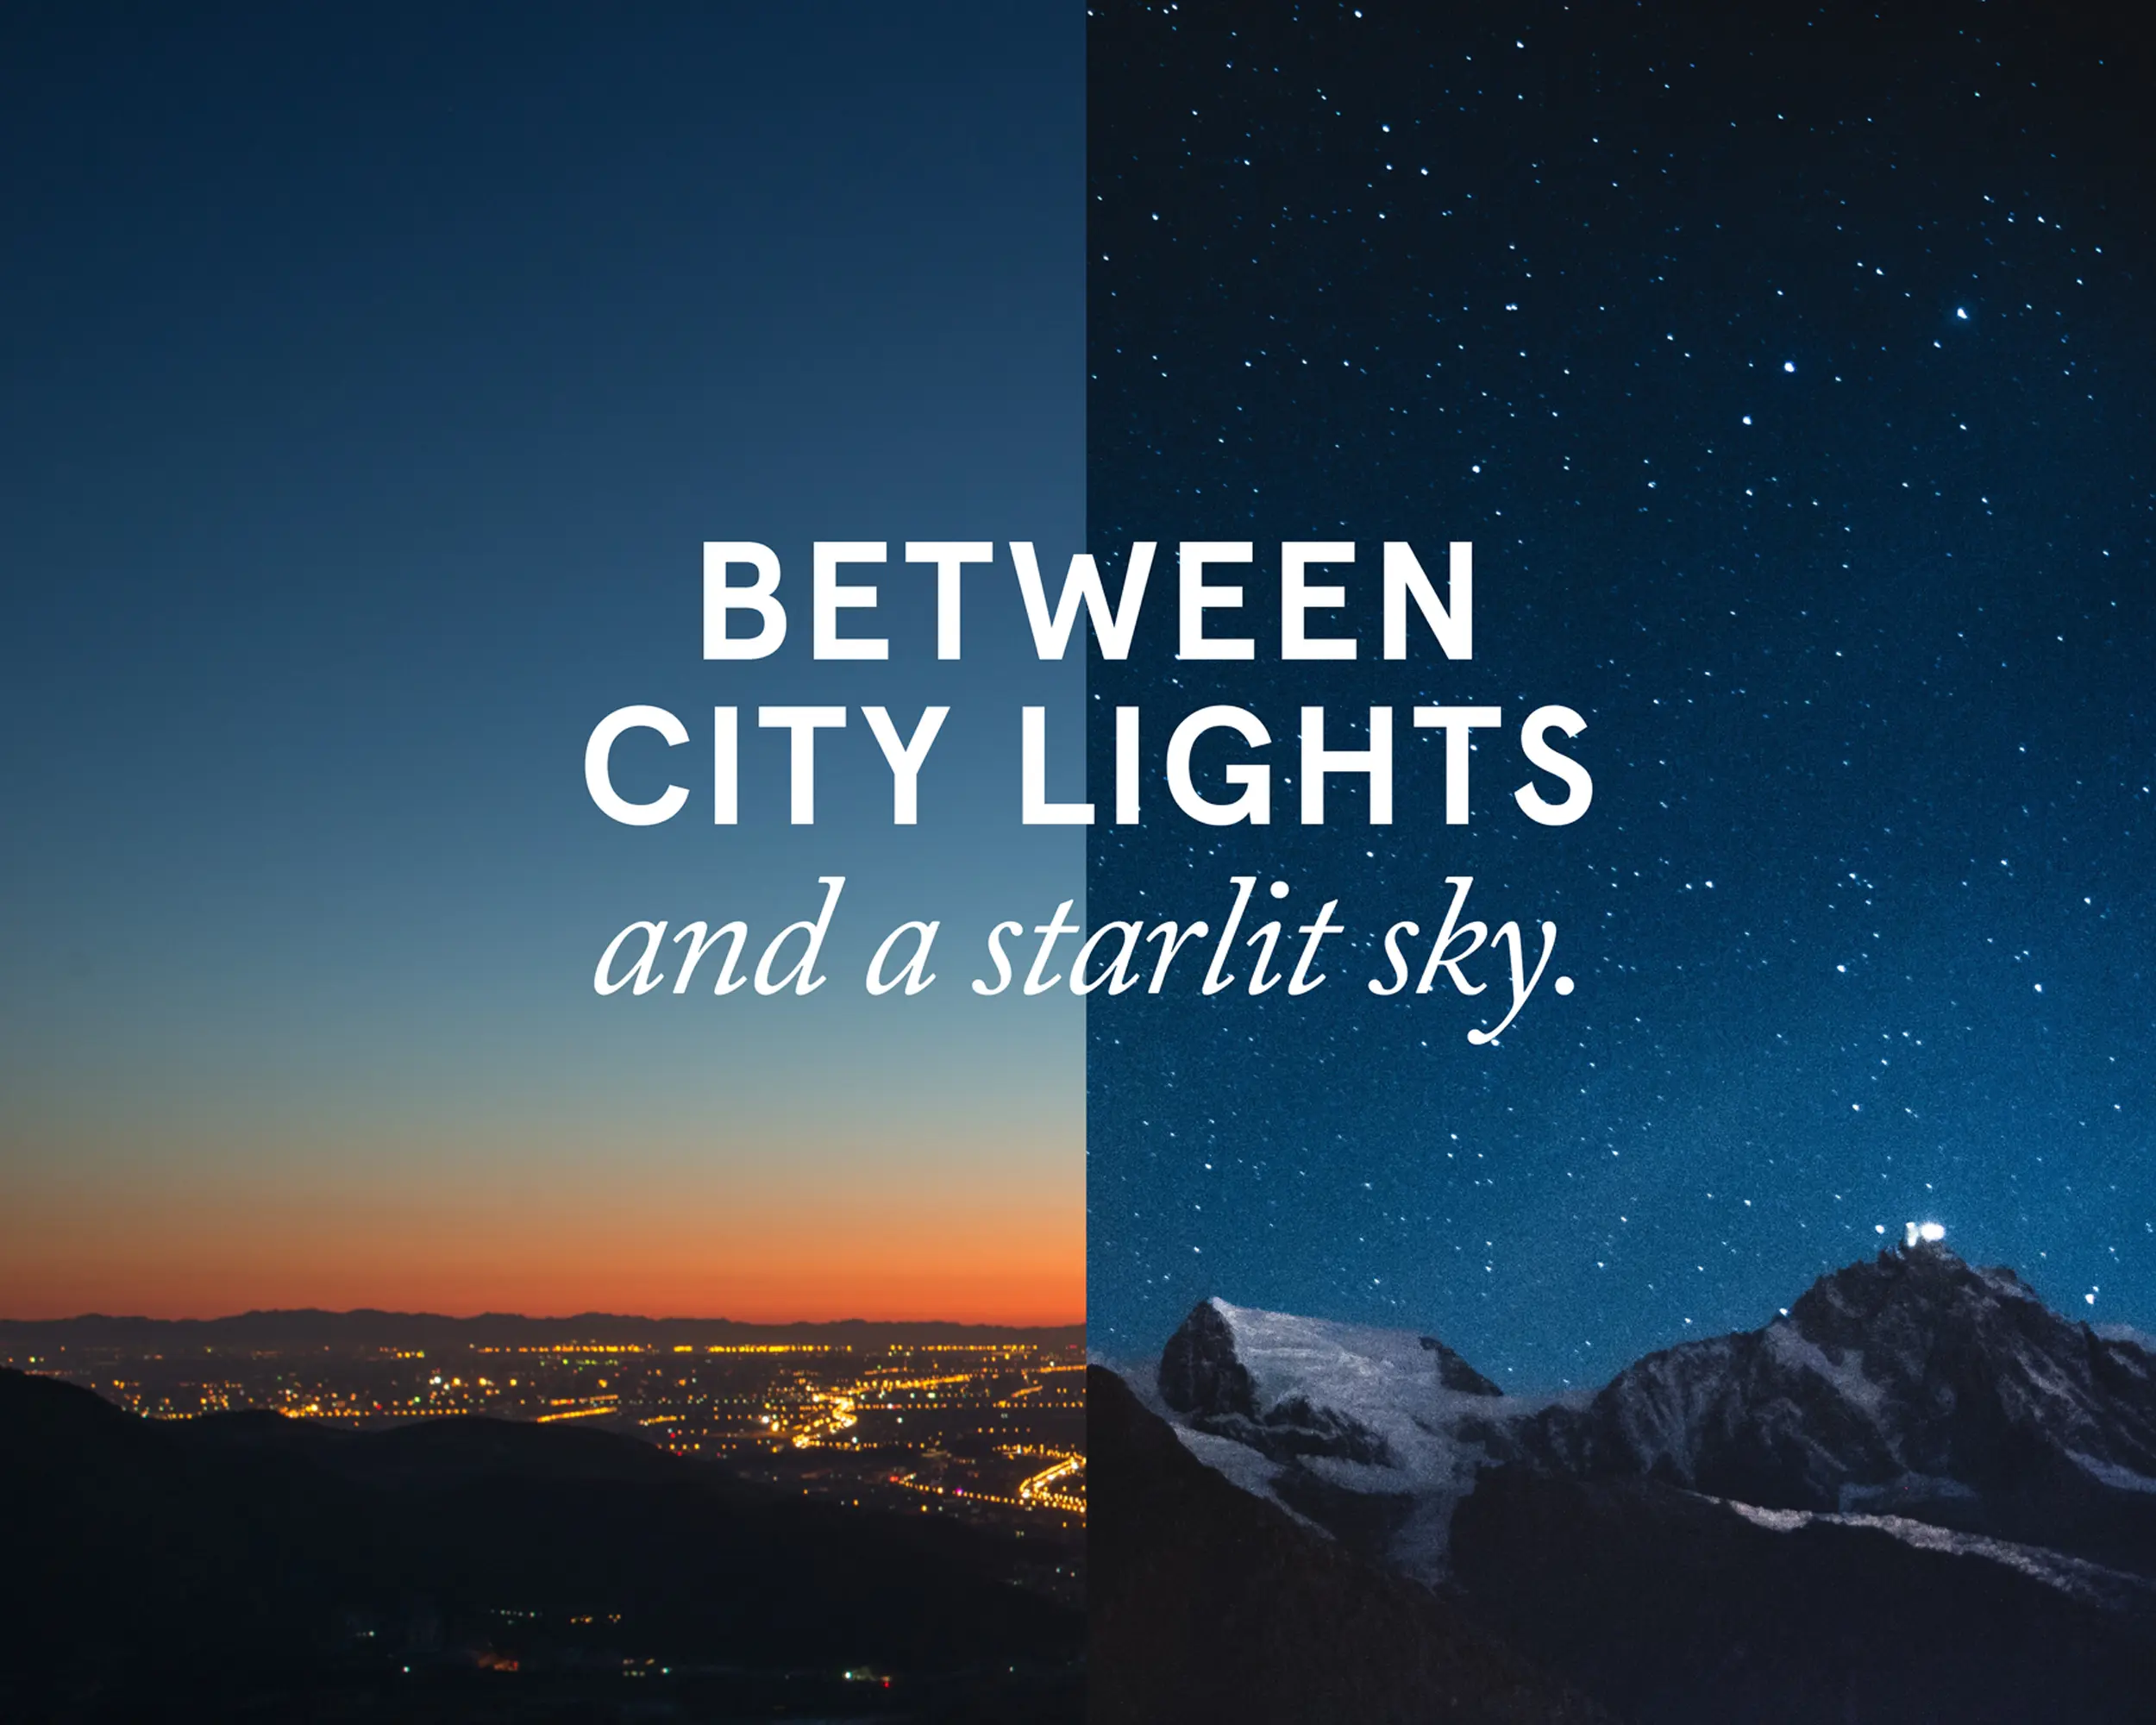 sky view of city at sunset and mountains at night. Reads Between city lights and a starlit sky. 